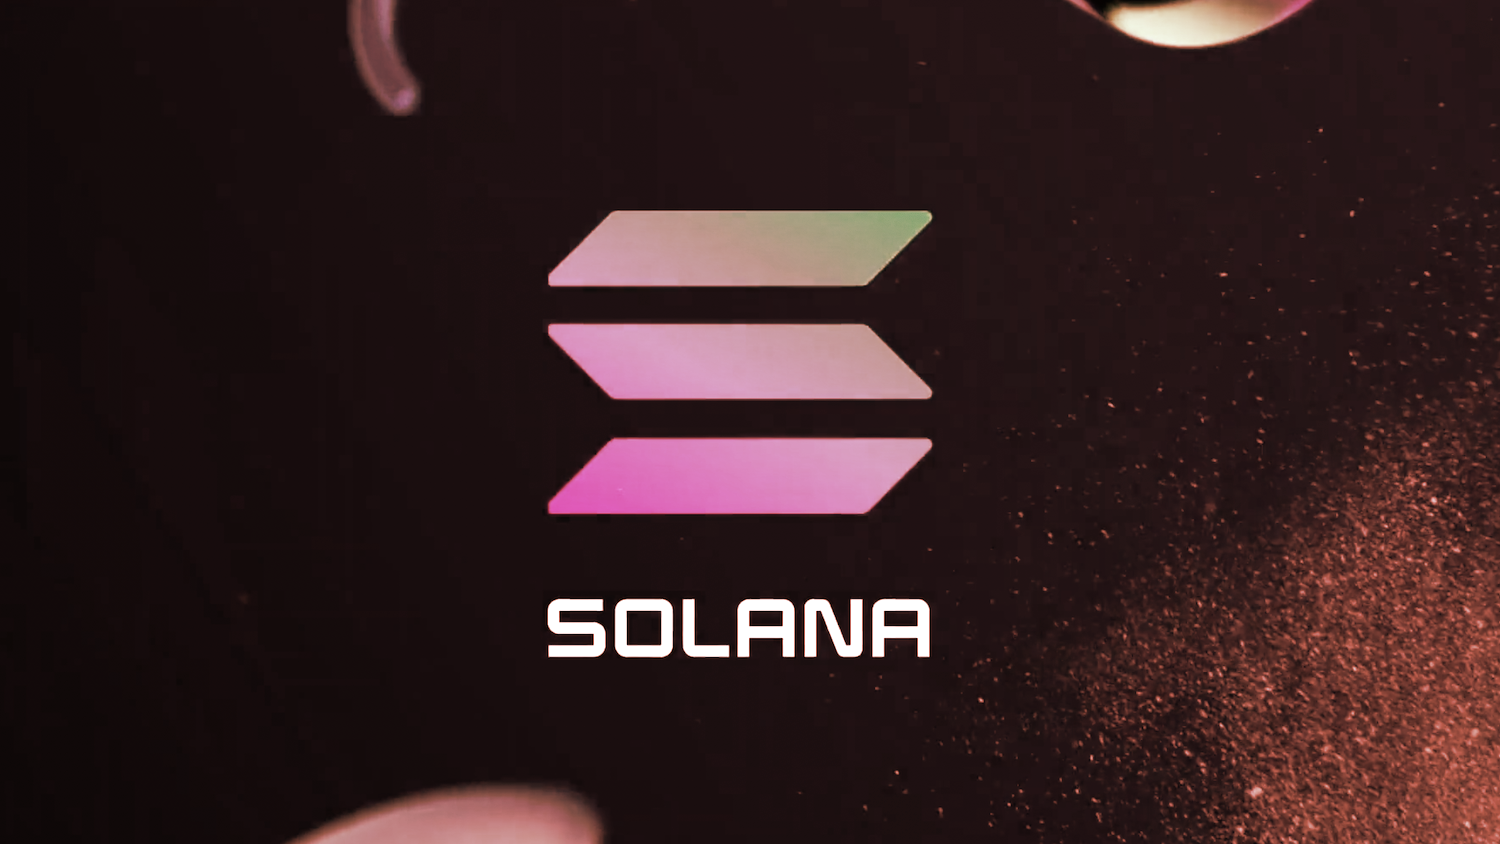 OpenSea Confirms It Will Start Listing Solana NFTs in April